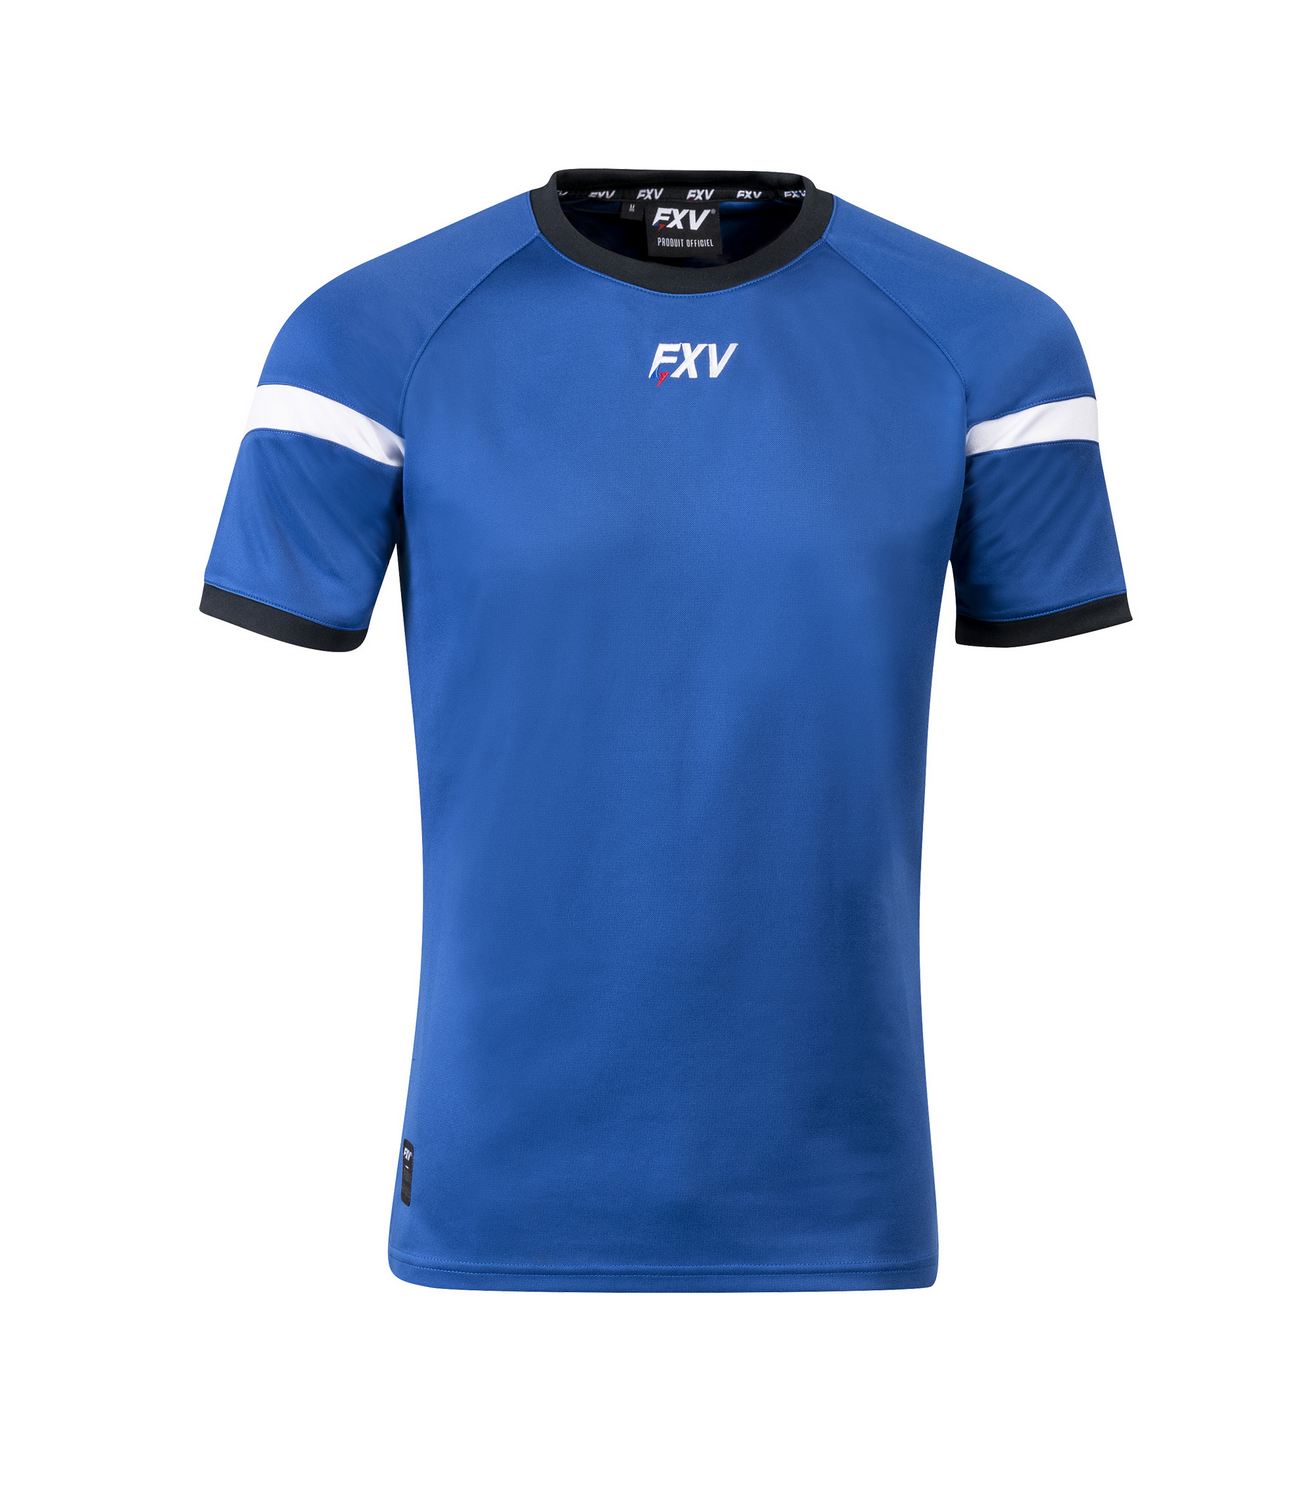 FORCE XV MAILLOT DE RUGBY TRAINING VICTOIRE Roy